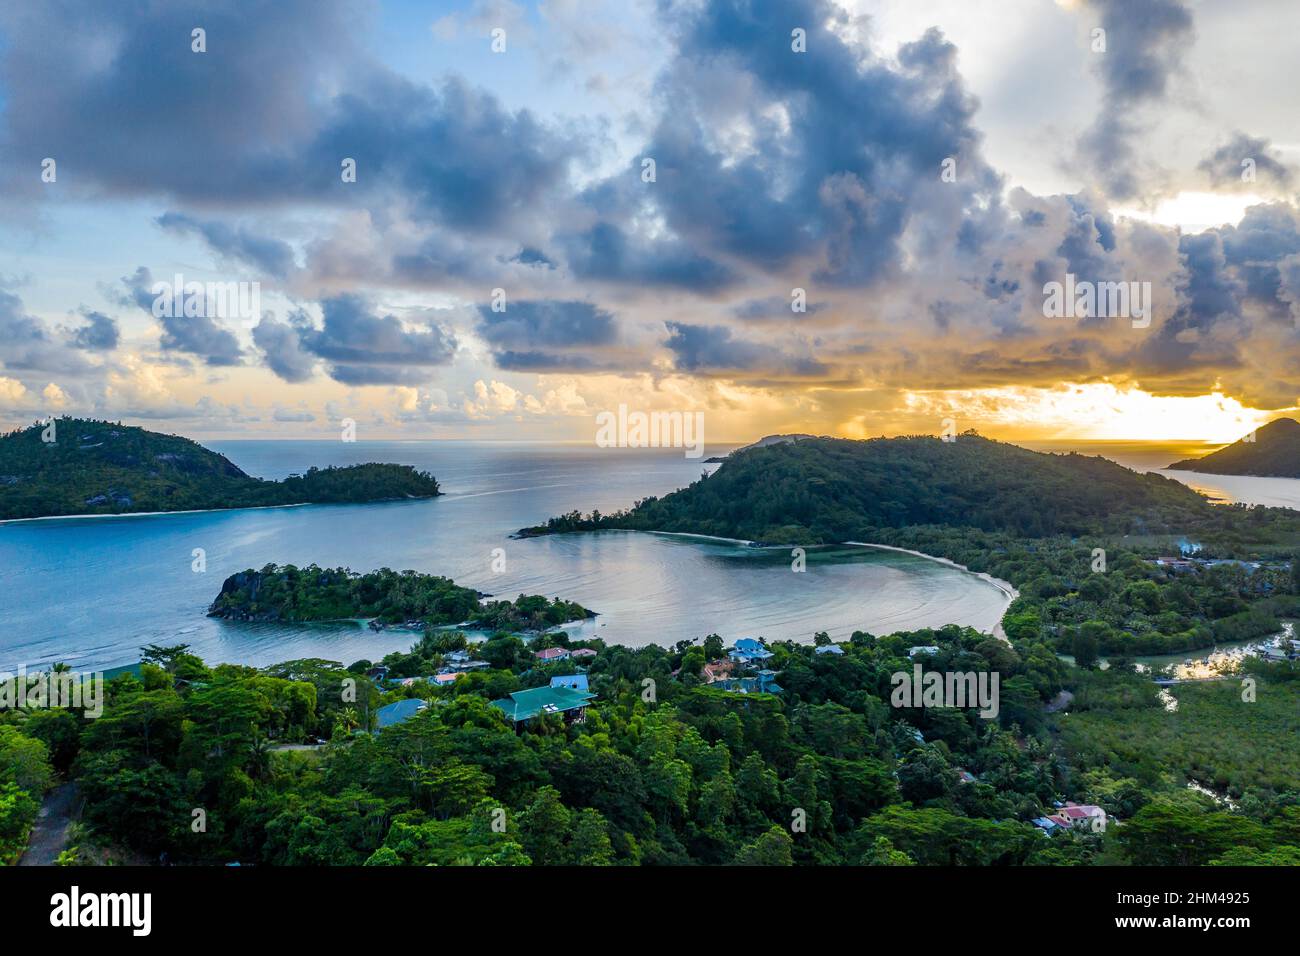 Mahe Island coast drone sunset landscape with dramatic sky, clouds, lush tropical forest and small islands around. Stock Photo